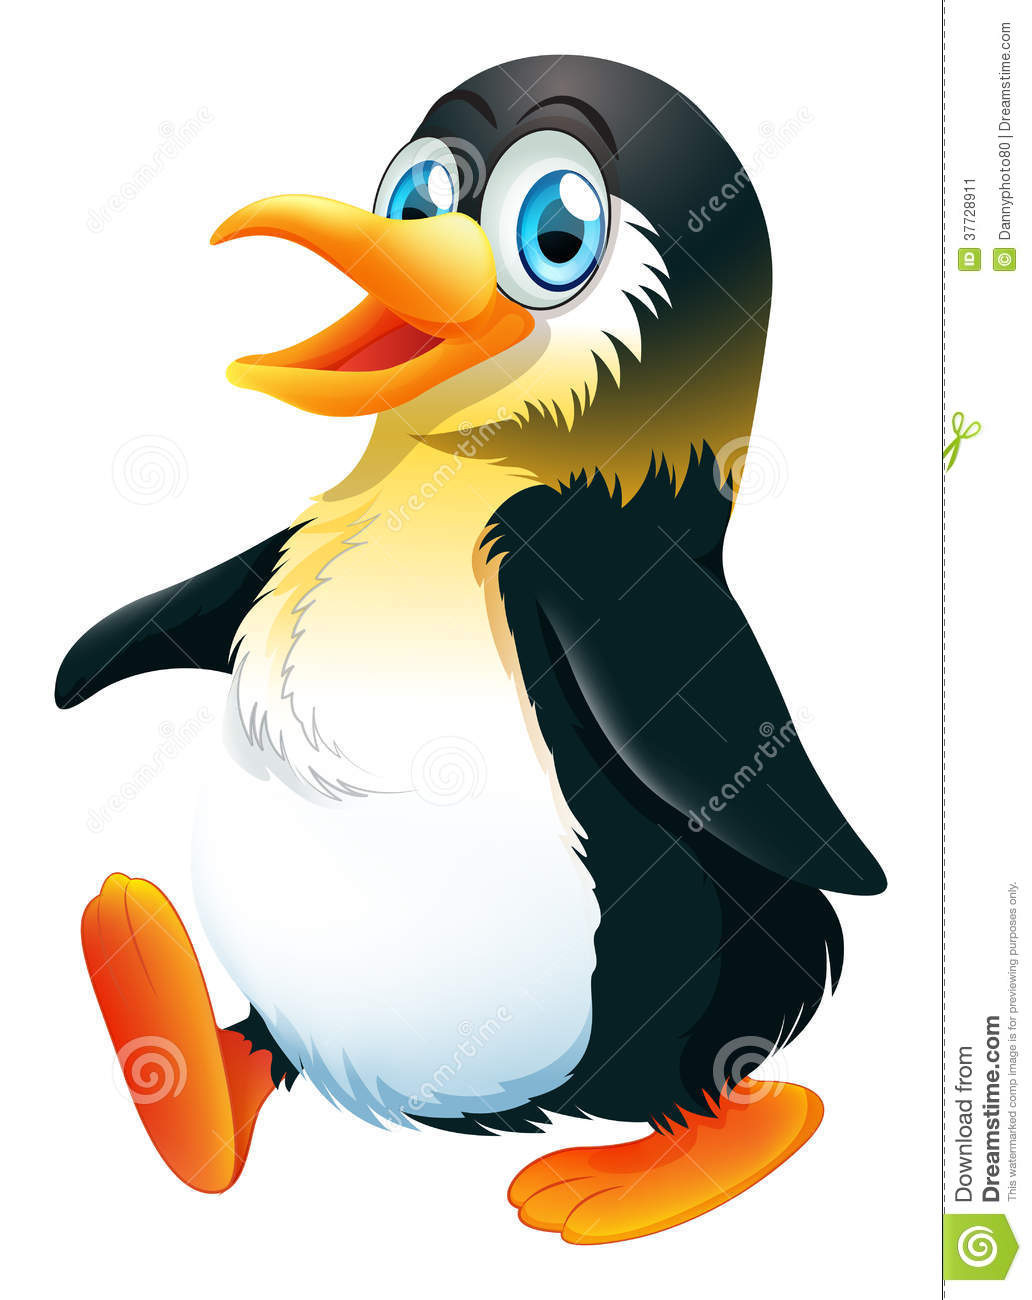 Illustration Of A Penguin Walking On A White Background